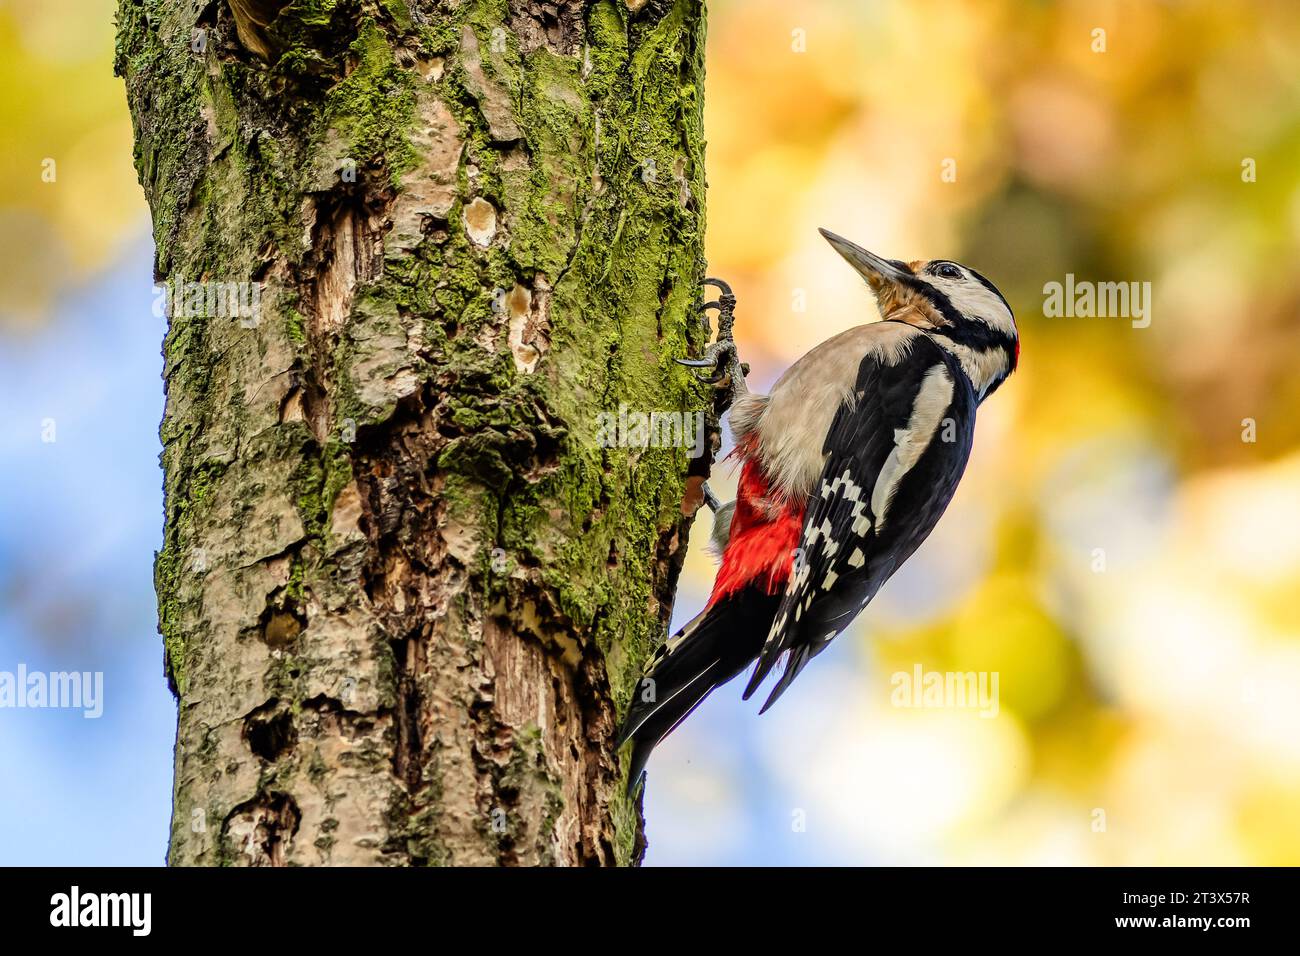 Close up image of the great spotted woodpecker, a black, white and red bird, perching on a tree bark covered with green moss. Sunny day with blue sky Stock Photo